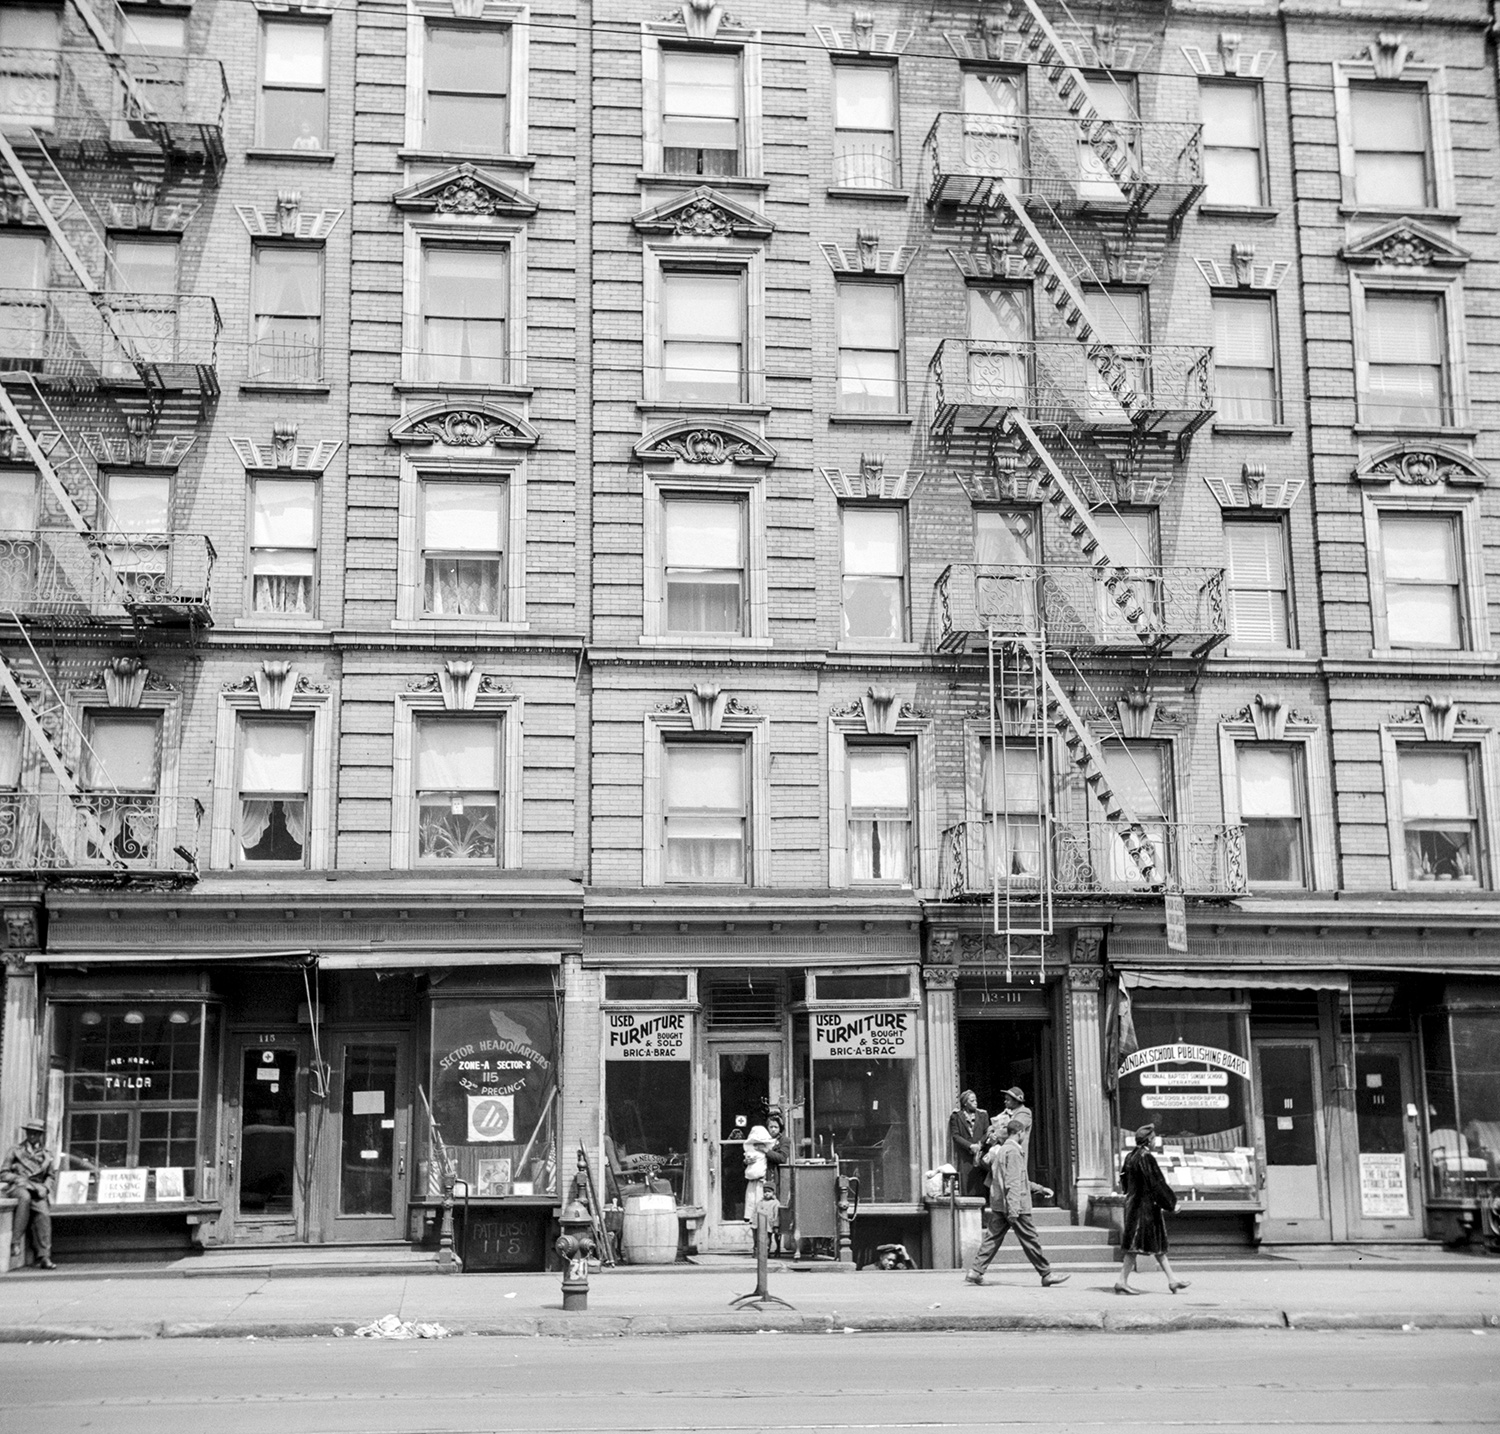 A 1940s photograph of two five-story tenement buildings with fire escapes and shops at street level. 